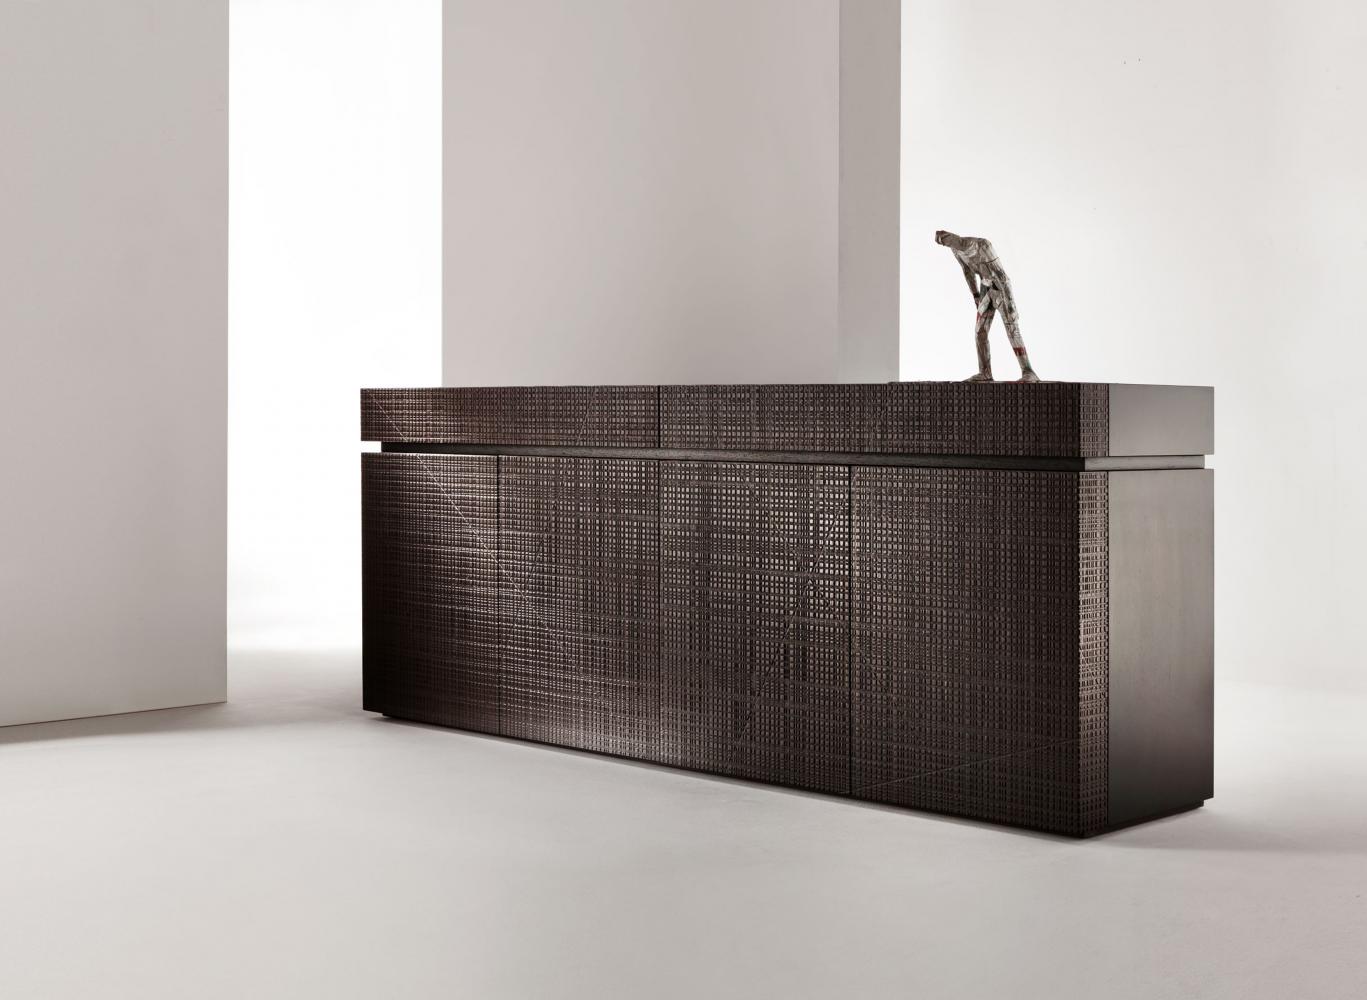 Laurameroni high-end luxury furniture for an exclusive dark brown wood colour palette inspiration